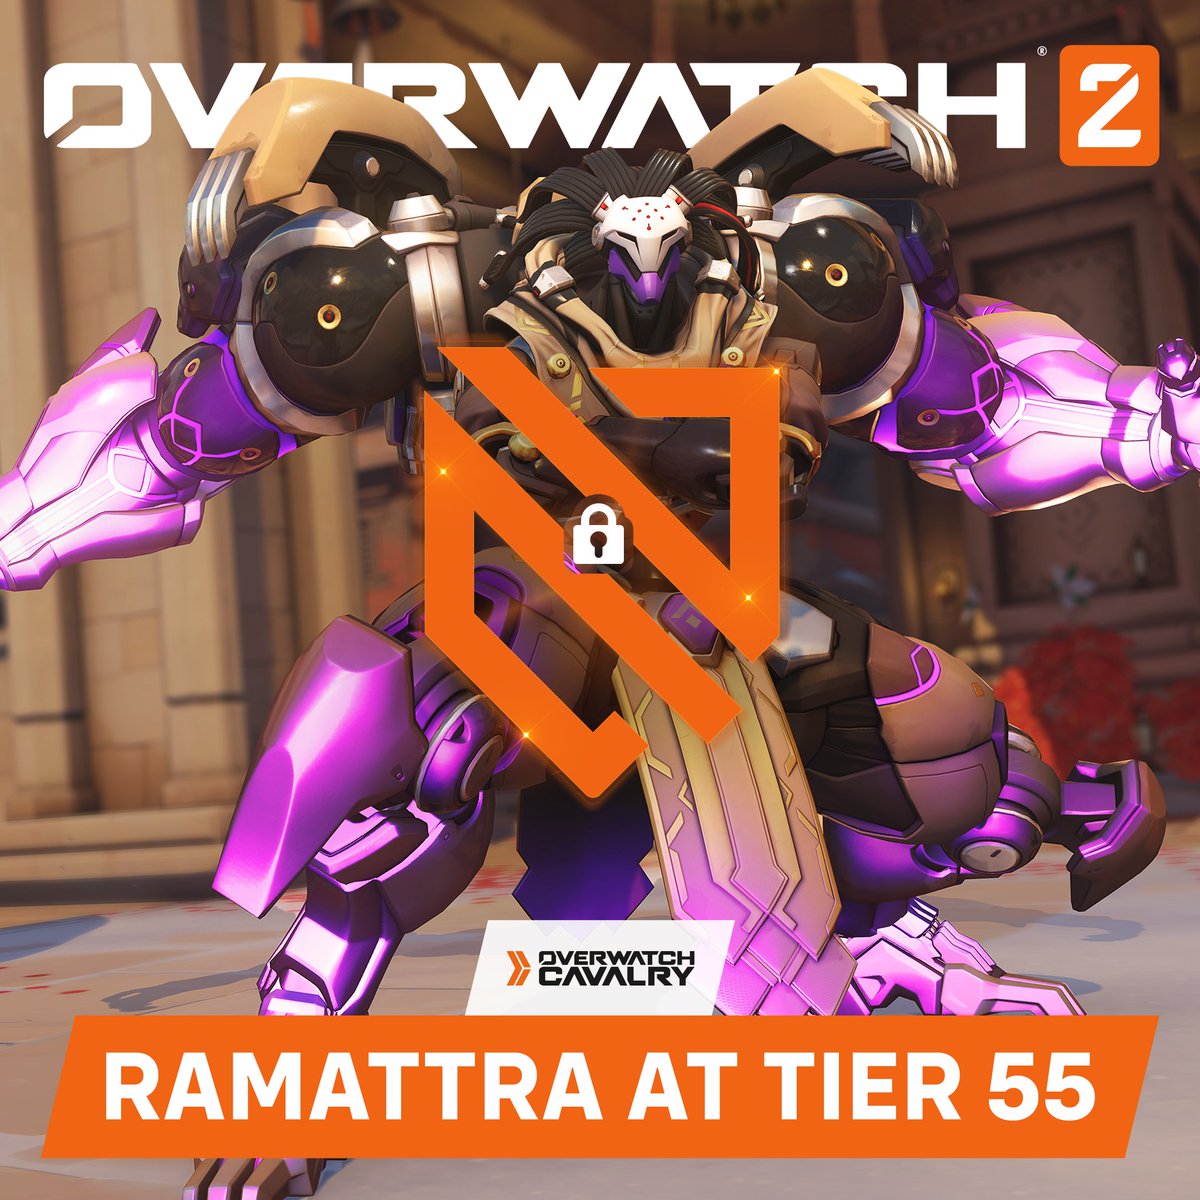 Ramattra will be the first #Overwatch2 Hero who will NOT be instantly available for Overwatch 1 players 🎟

The new hero will be available in the Season 2 Battle Pass — unlocked instantly for players on the Premium track but at Tier 55 for those on the free track 🔒